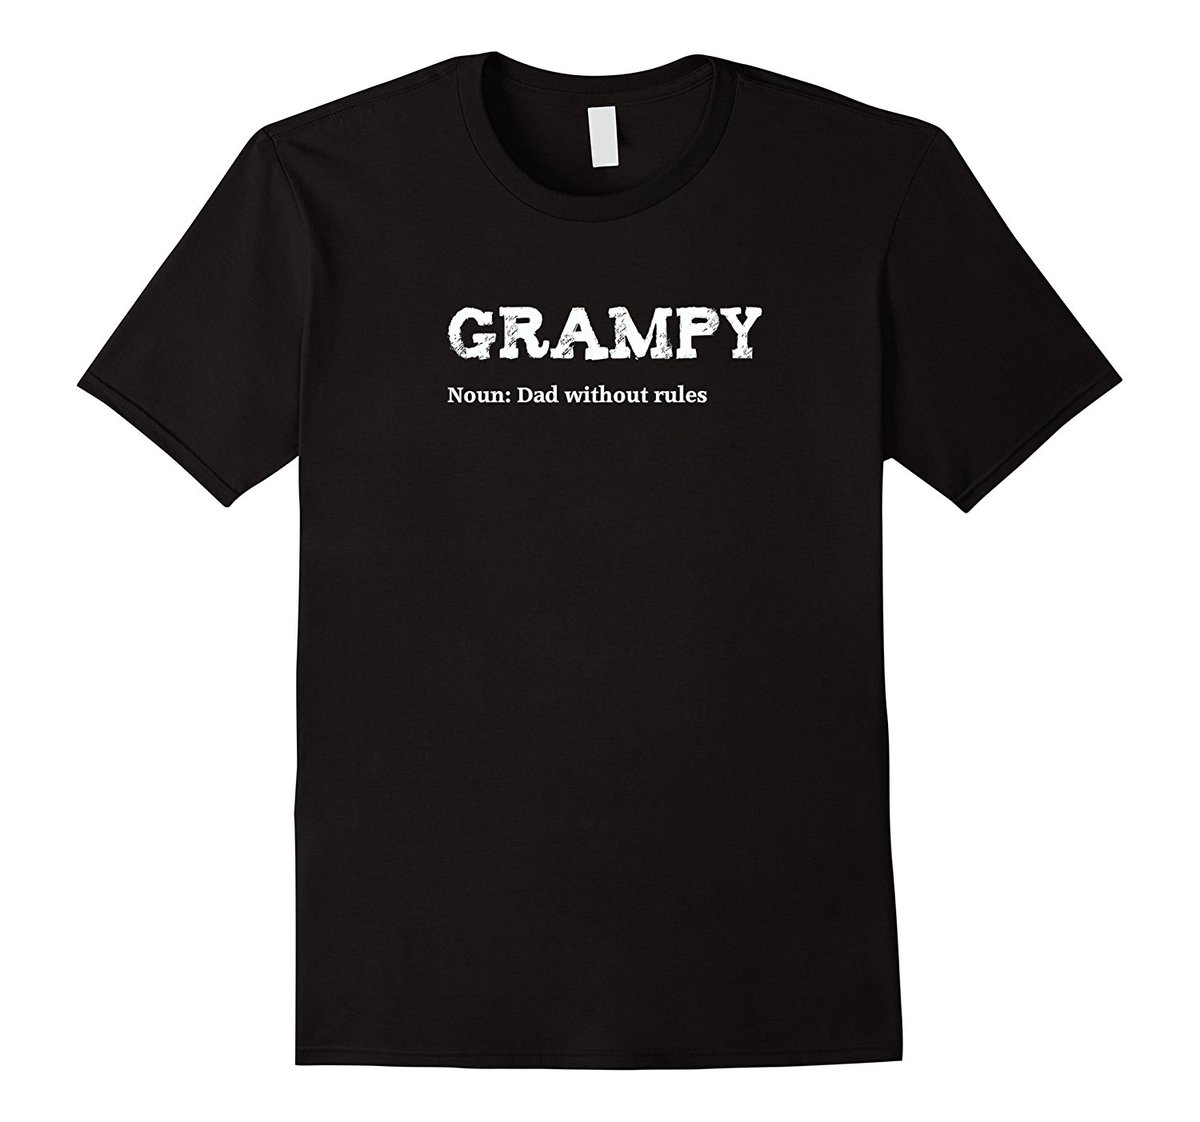 #Grampy gift t-shirt - Dad Without Rules - amzn.to/2BR1KGq #